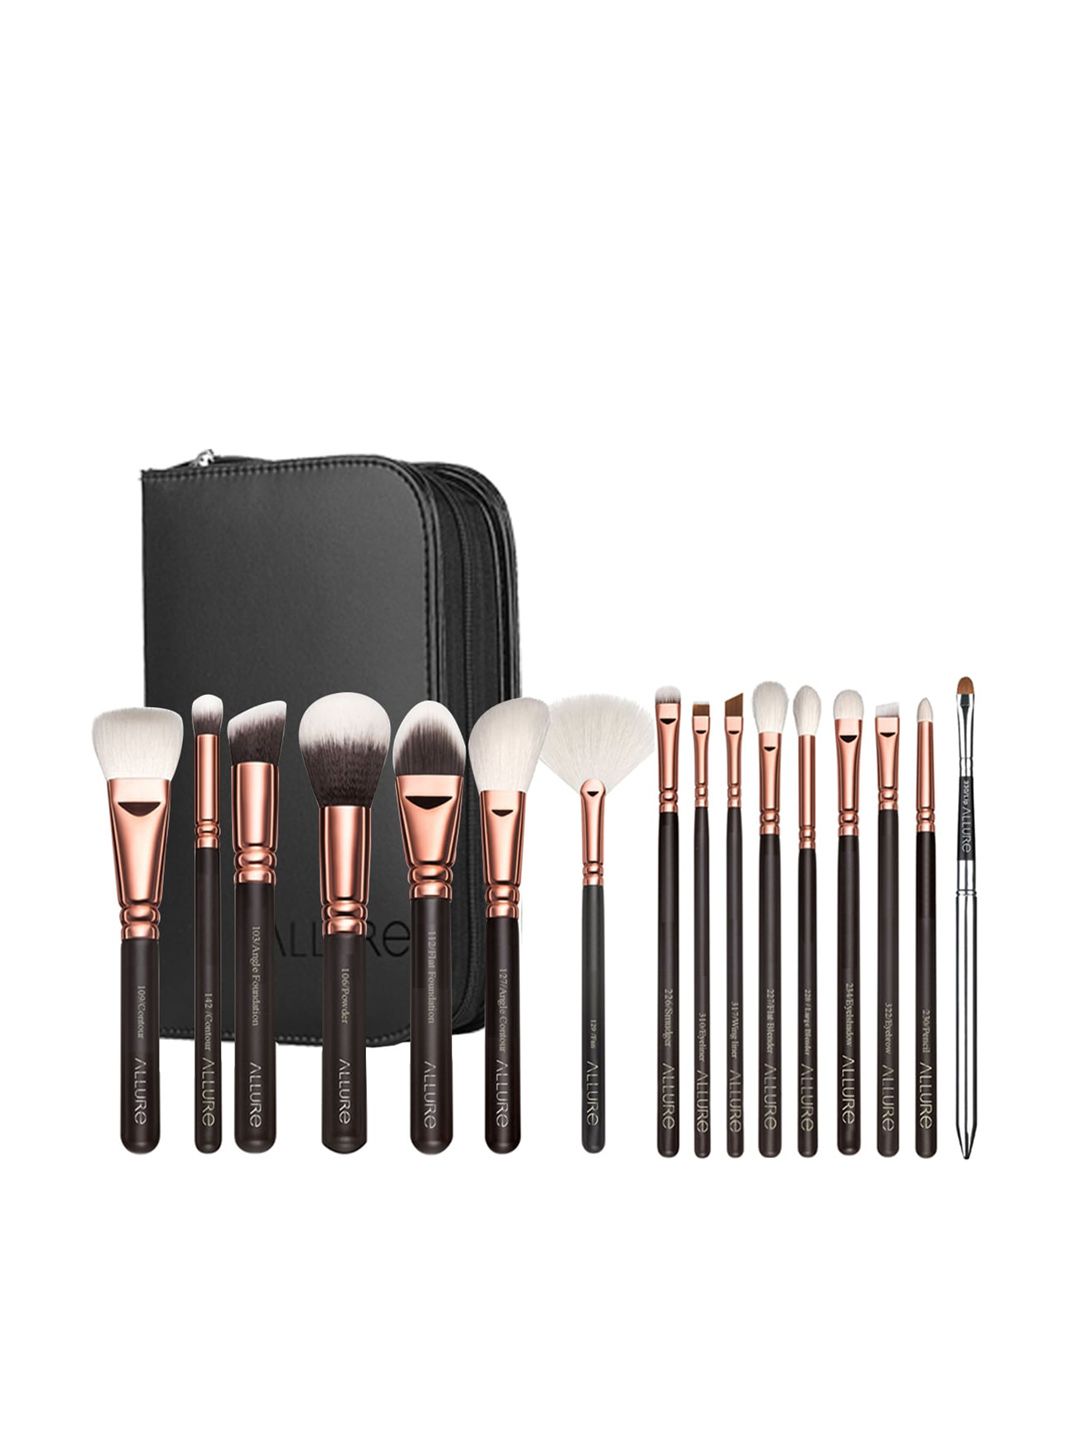 Allure Set of 16 Makeup Brushes - RGK 16 Price in India